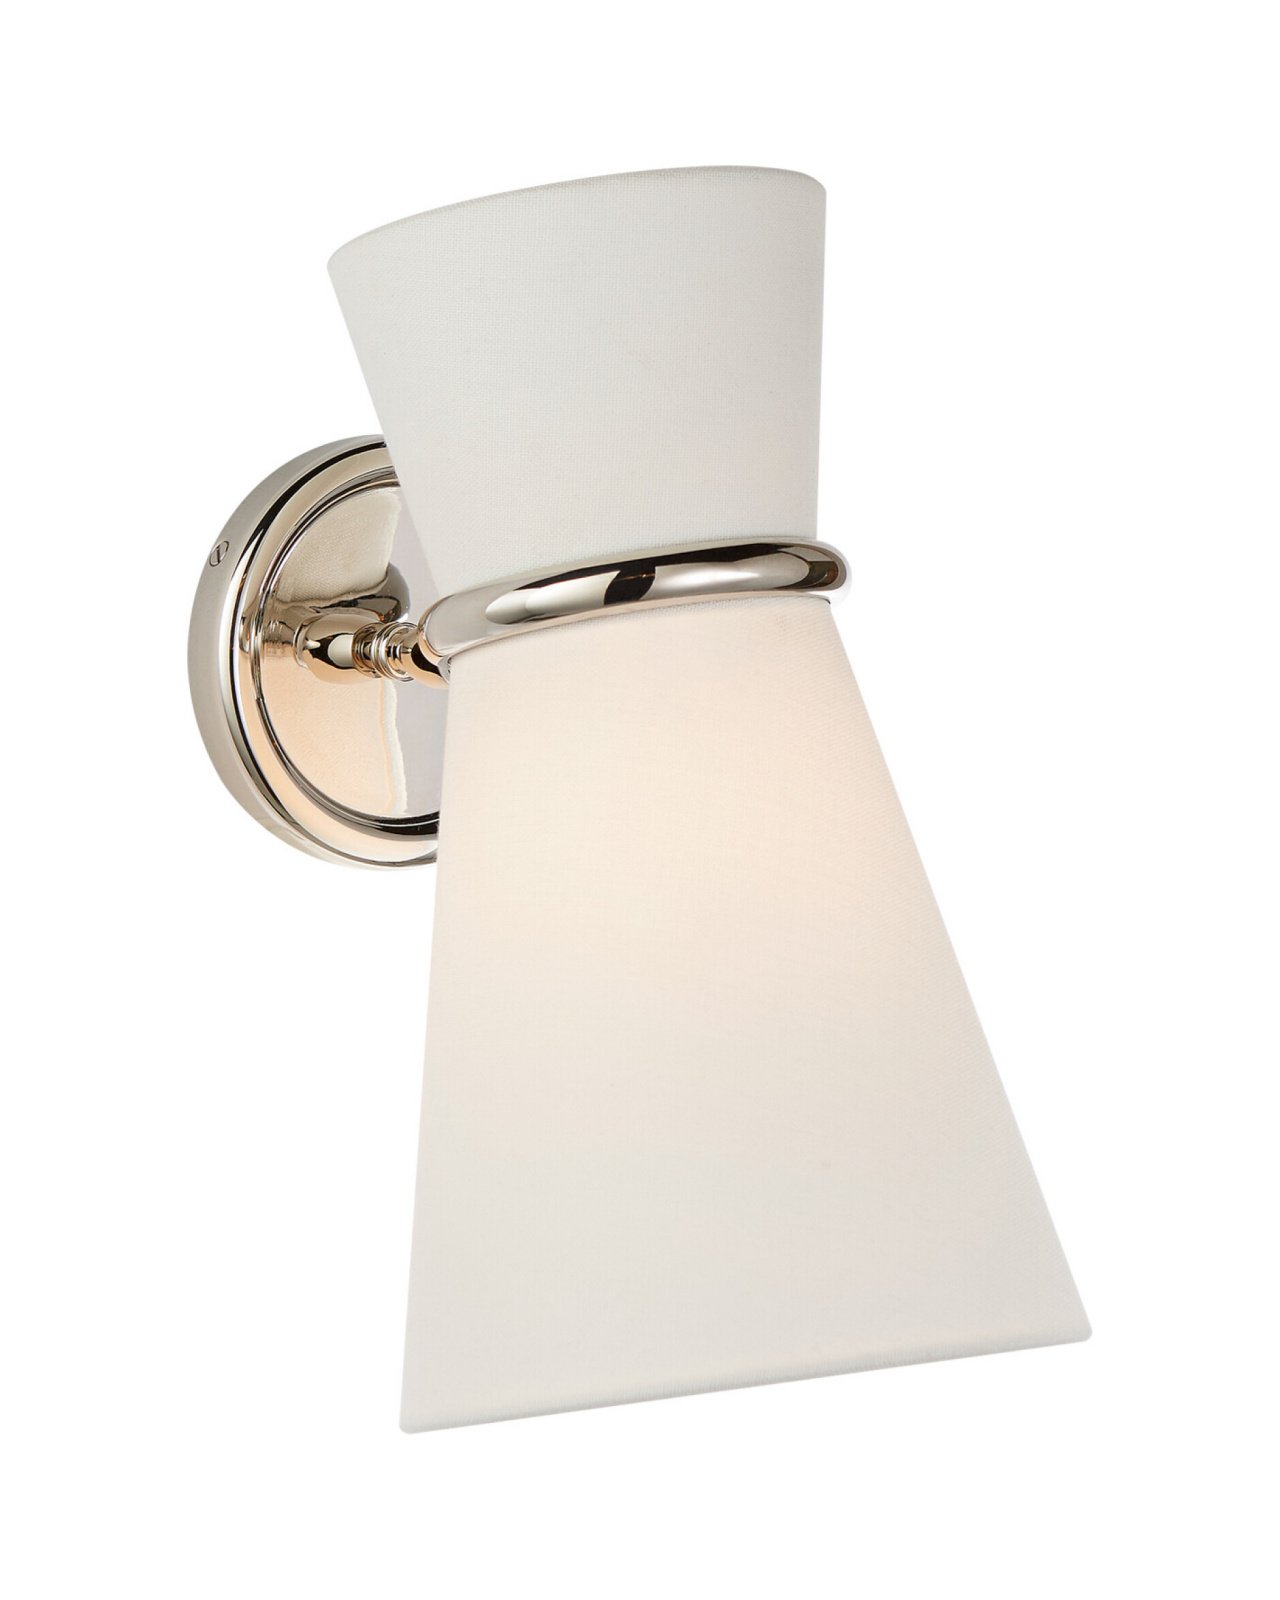 Clarkson Small Single Pivoting Sconce Polished Nickel